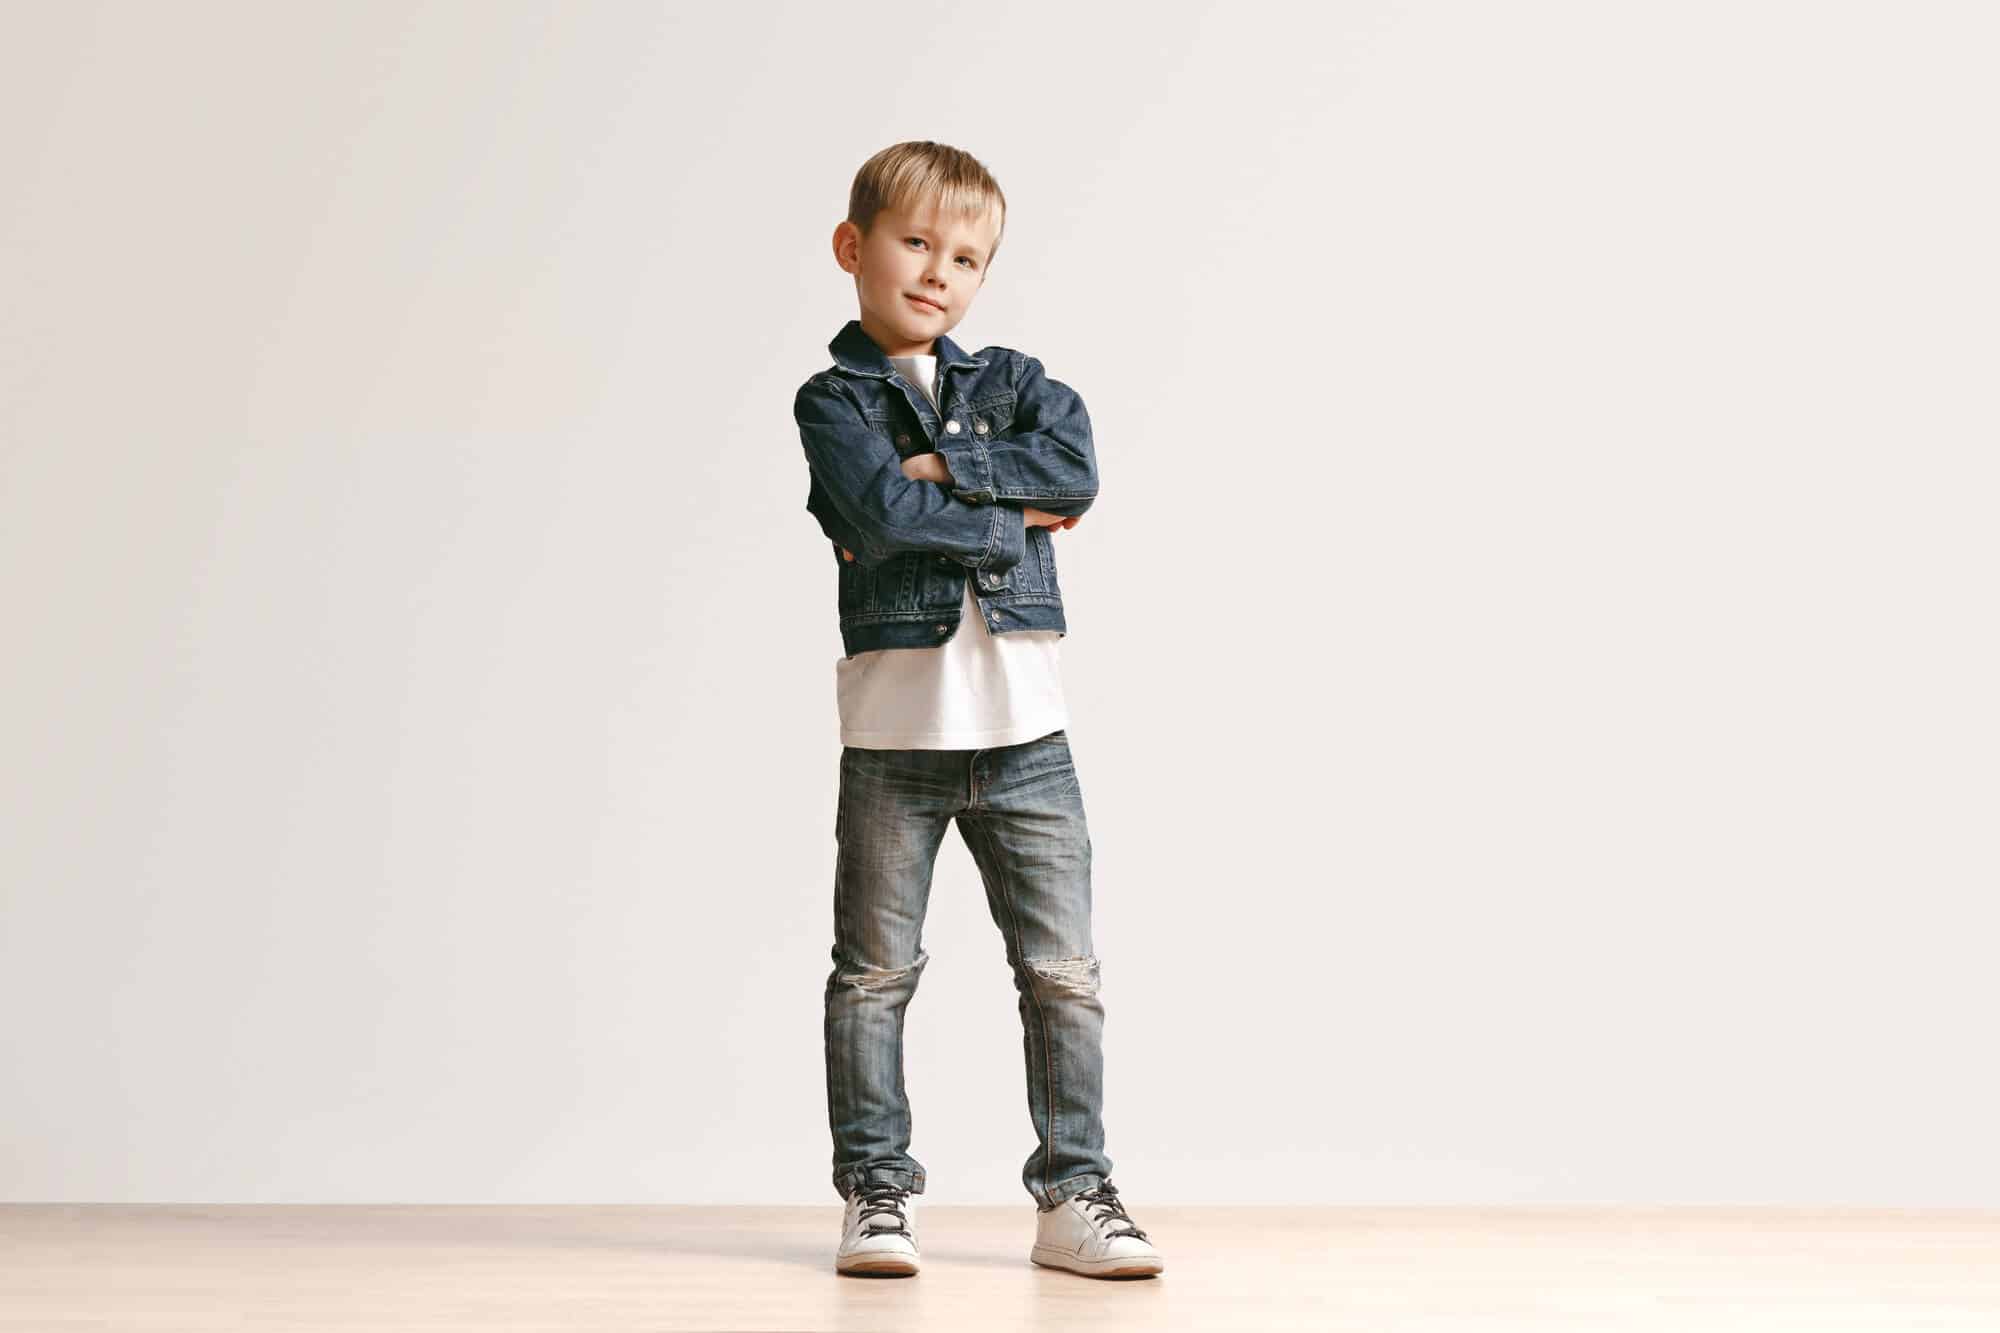 How will self-dressing enhance your child’s confidence?